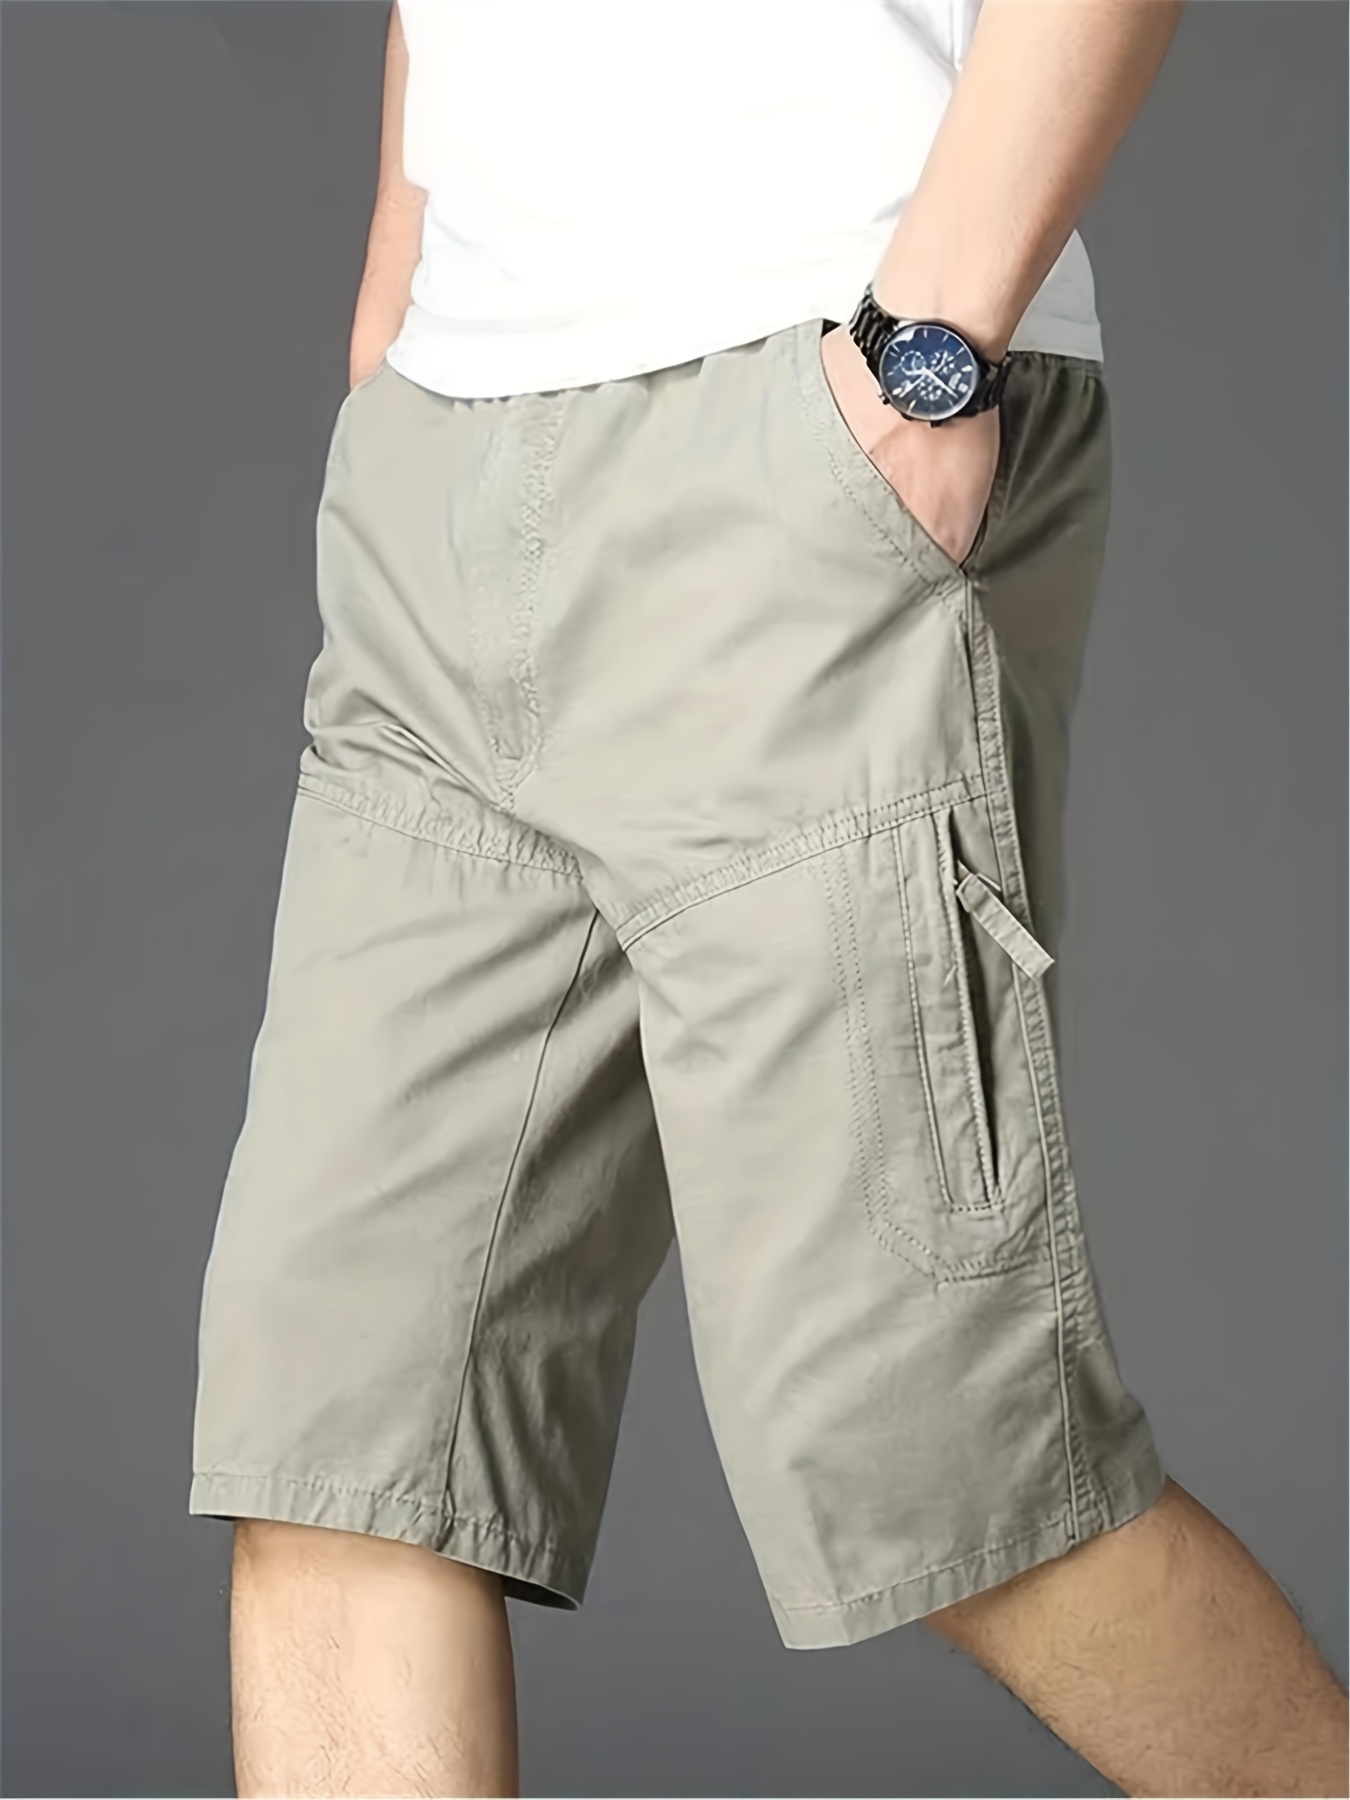 White Cargo Shorts For Men Male Casual Pants Splicing Trend Youth